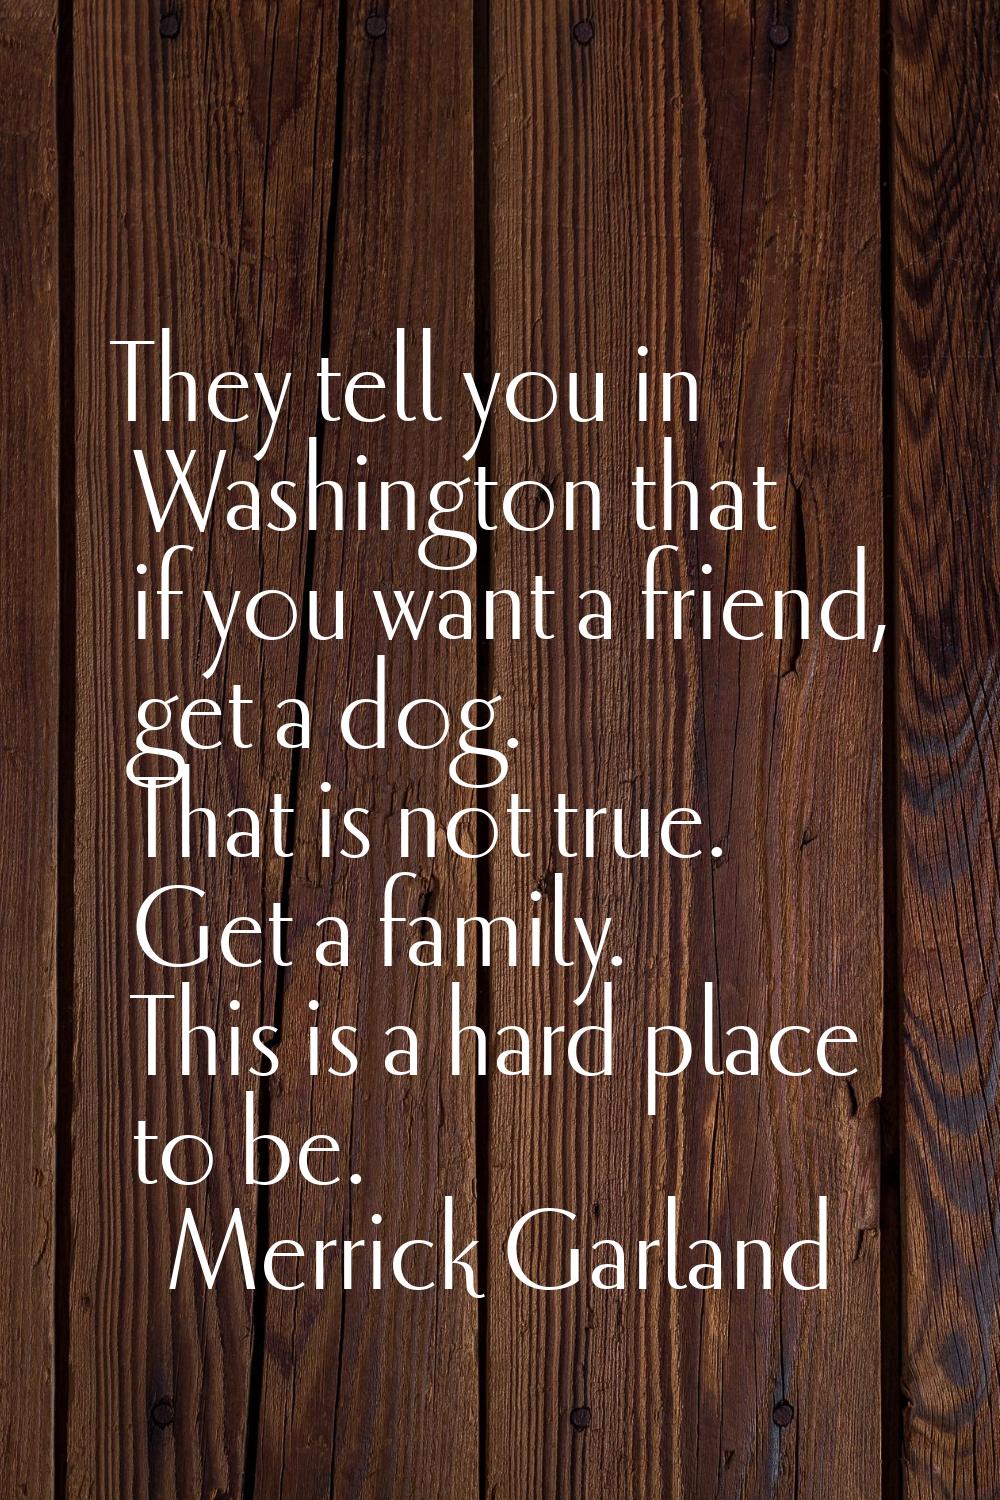 They tell you in Washington that if you want a friend, get a dog. That is not true. Get a family. T